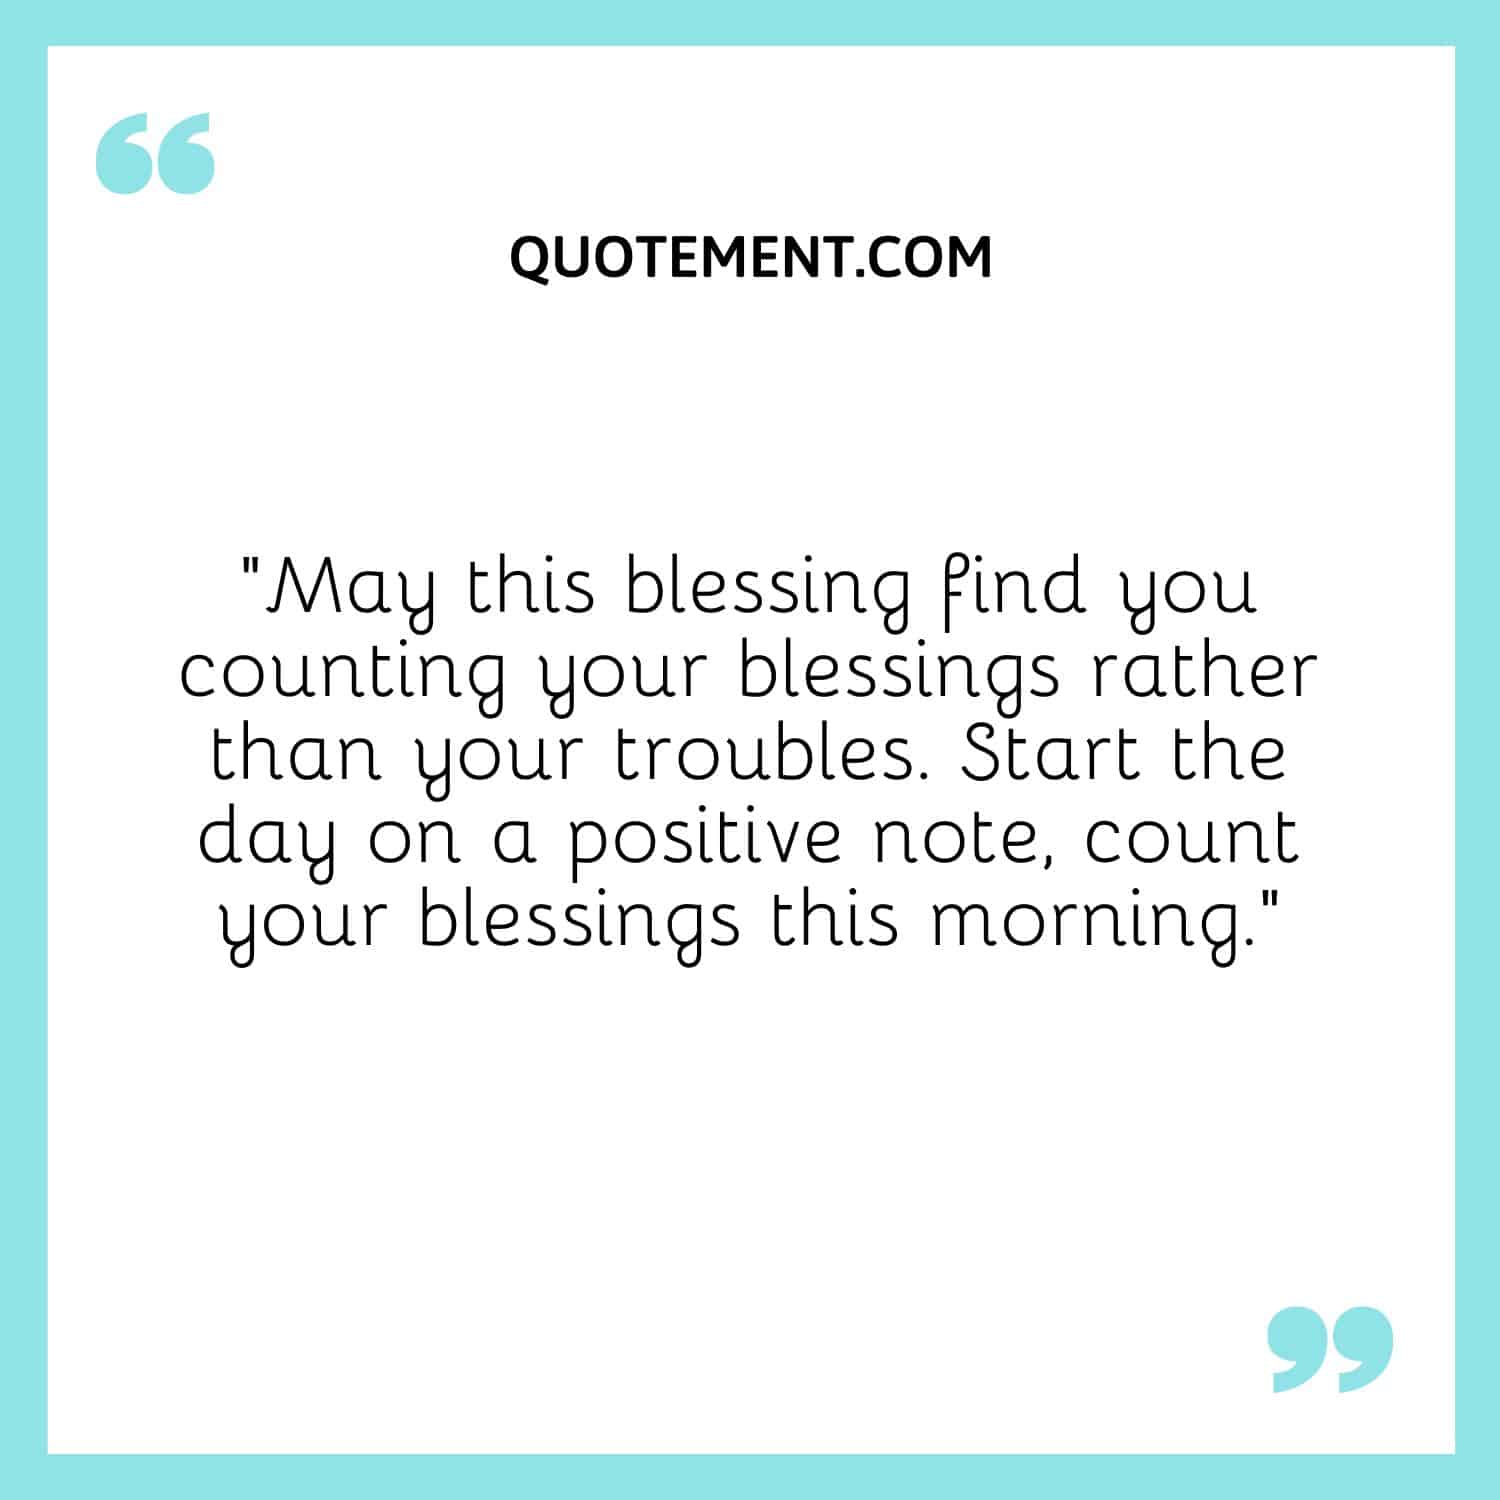 May this blessing find you counting your blessings rather than your troubles